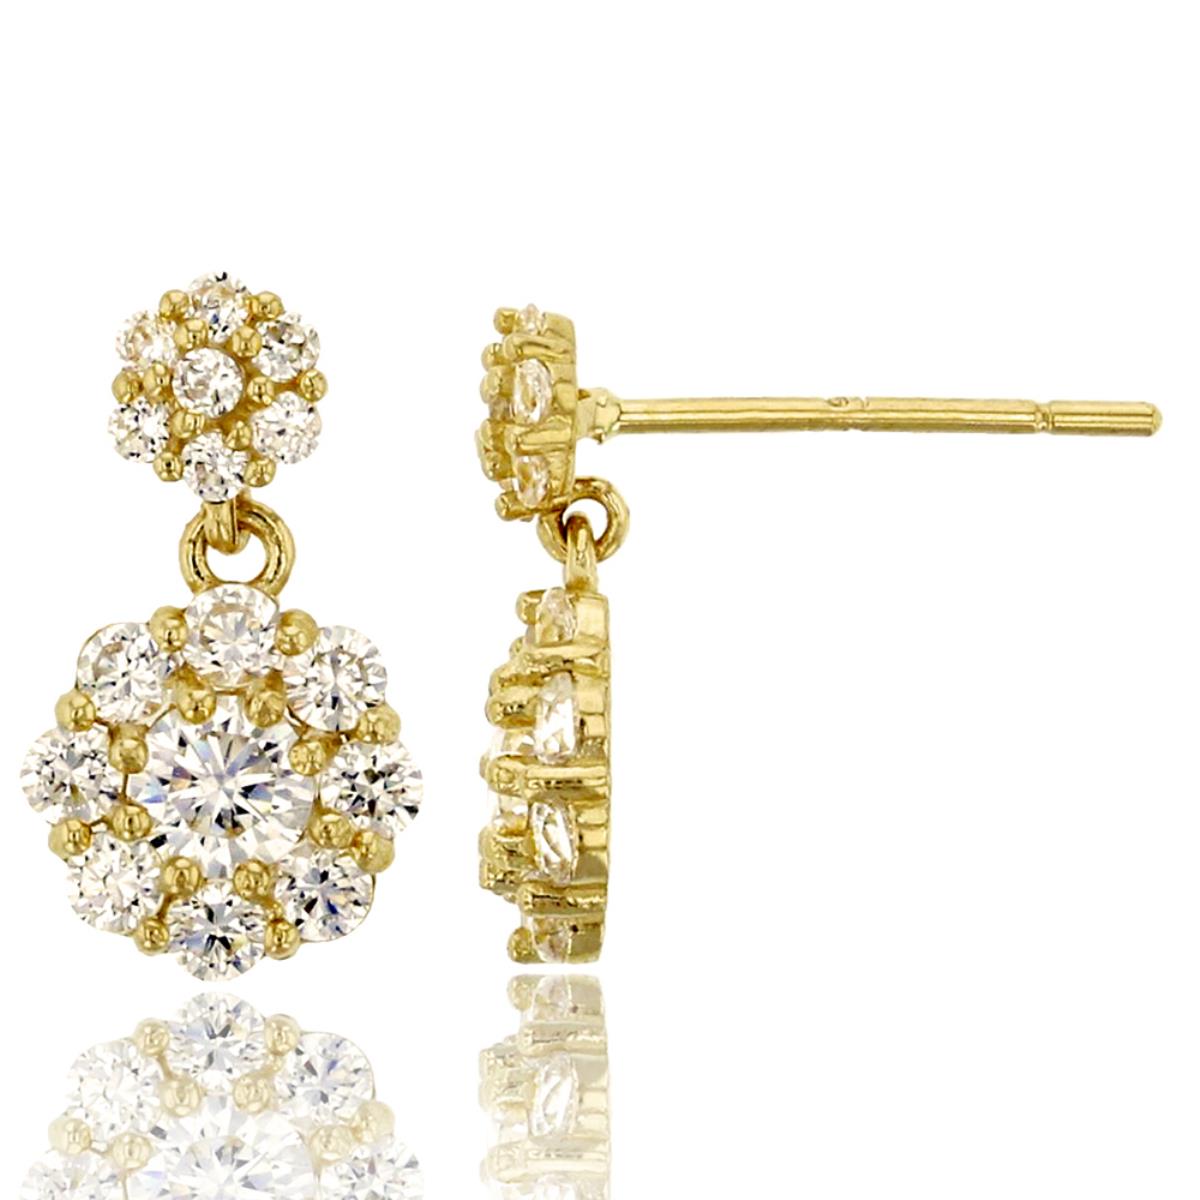 14K Yellow Gold Micropave Round Cut Cluster Flower CZ Dangling Earring